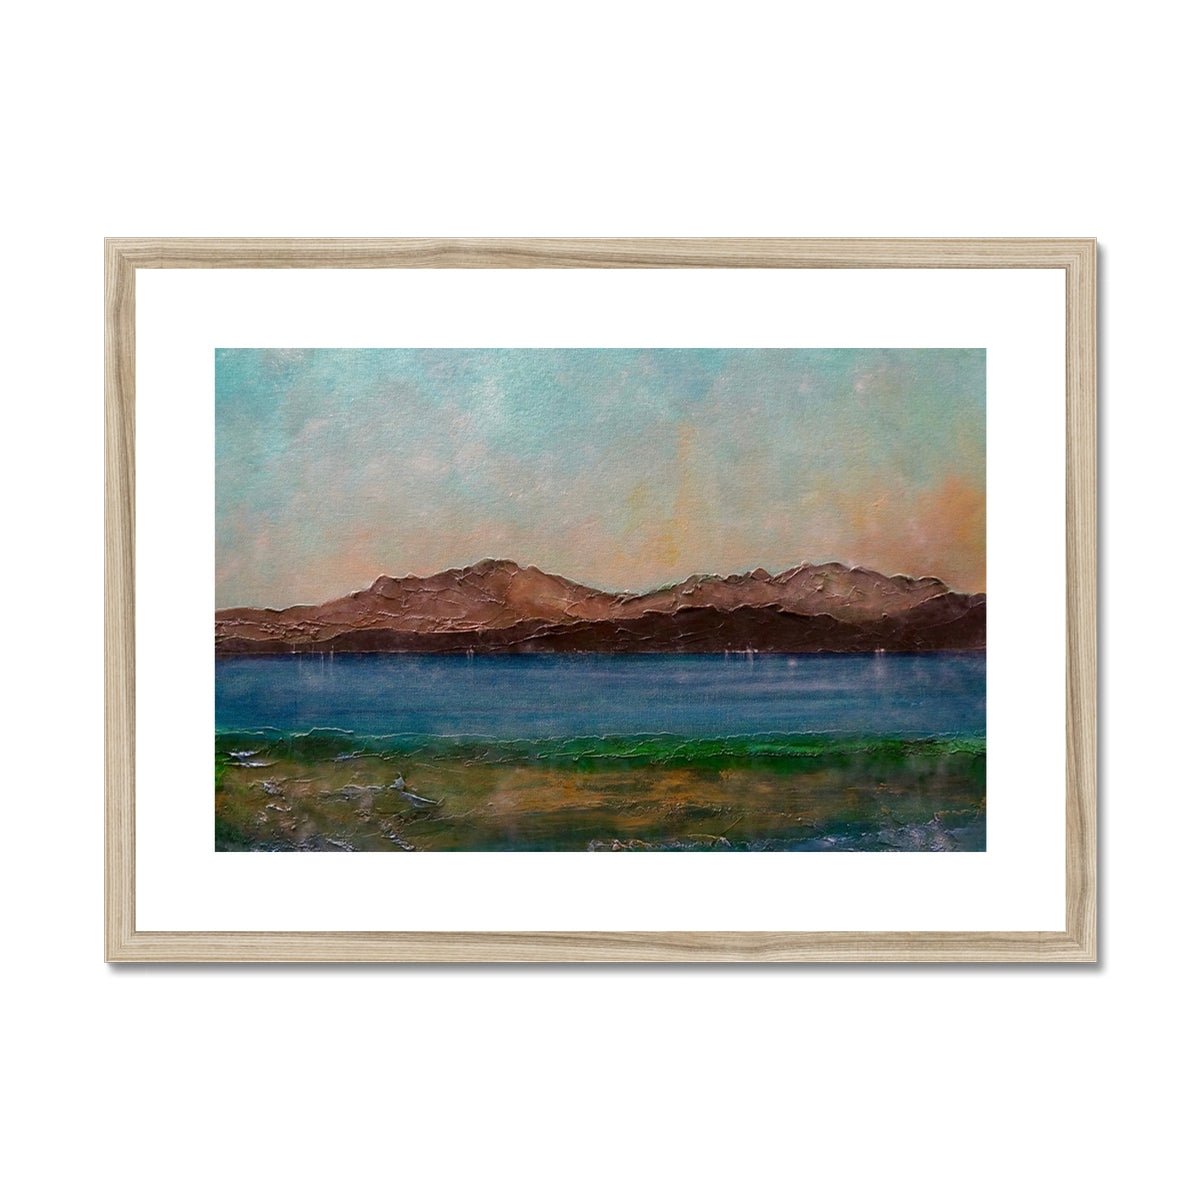 Arran From Scalpsie Bay Painting | Framed & Mounted Prints From Scotland-Framed & Mounted Prints-Arran Art Gallery-A2 Landscape-Natural Frame-Paintings, Prints, Homeware, Art Gifts From Scotland By Scottish Artist Kevin Hunter